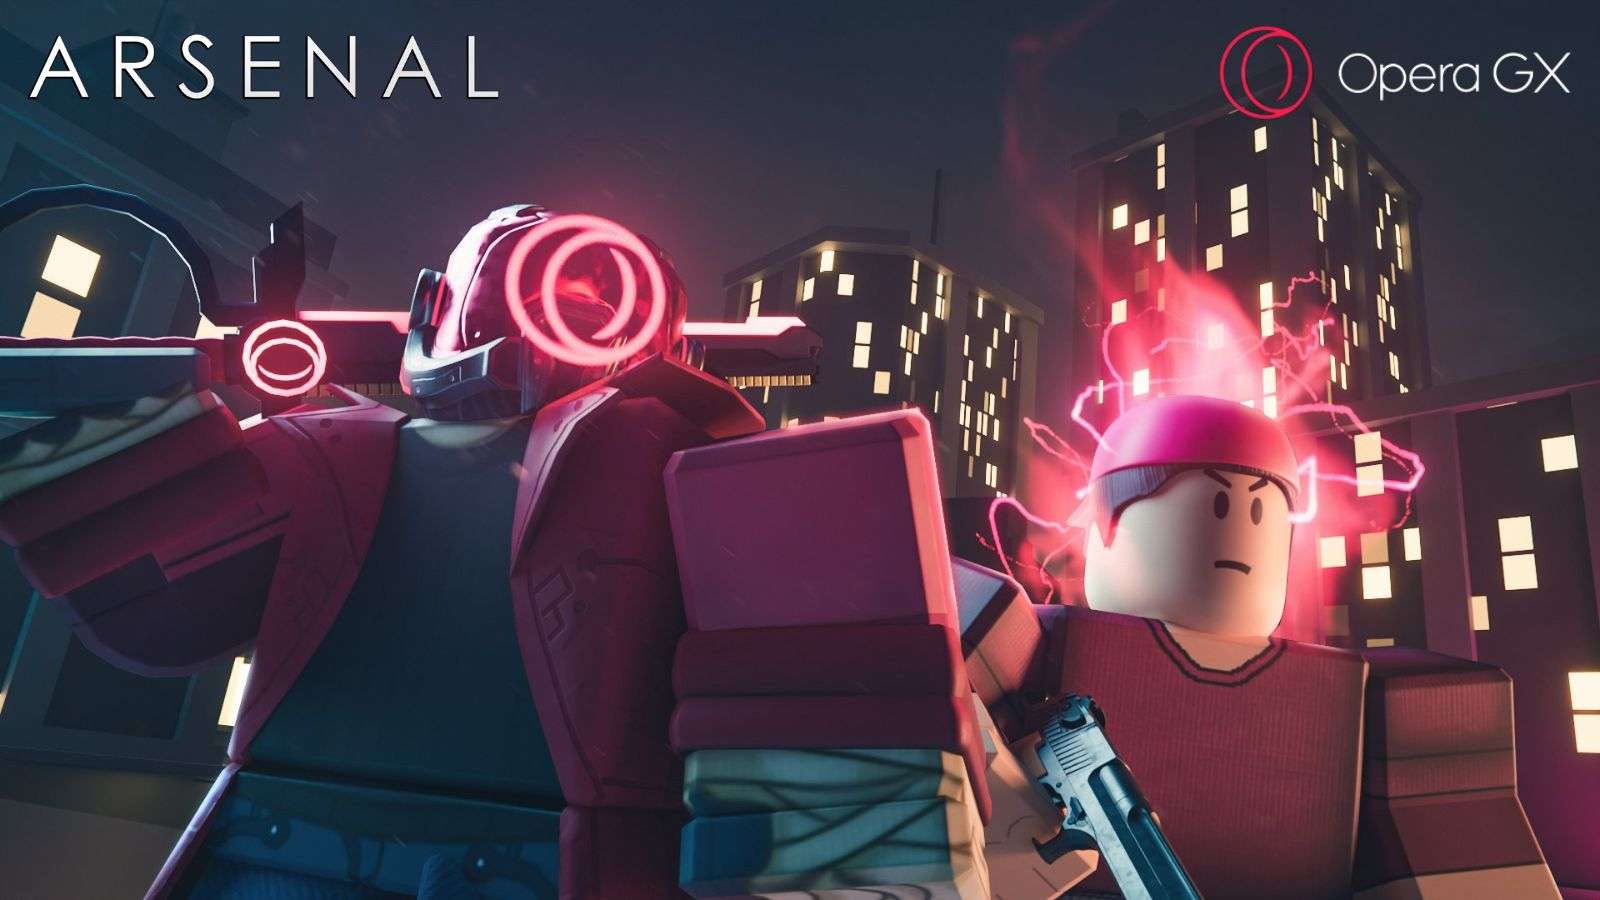 Roblox Arsenal and OperaGX collab